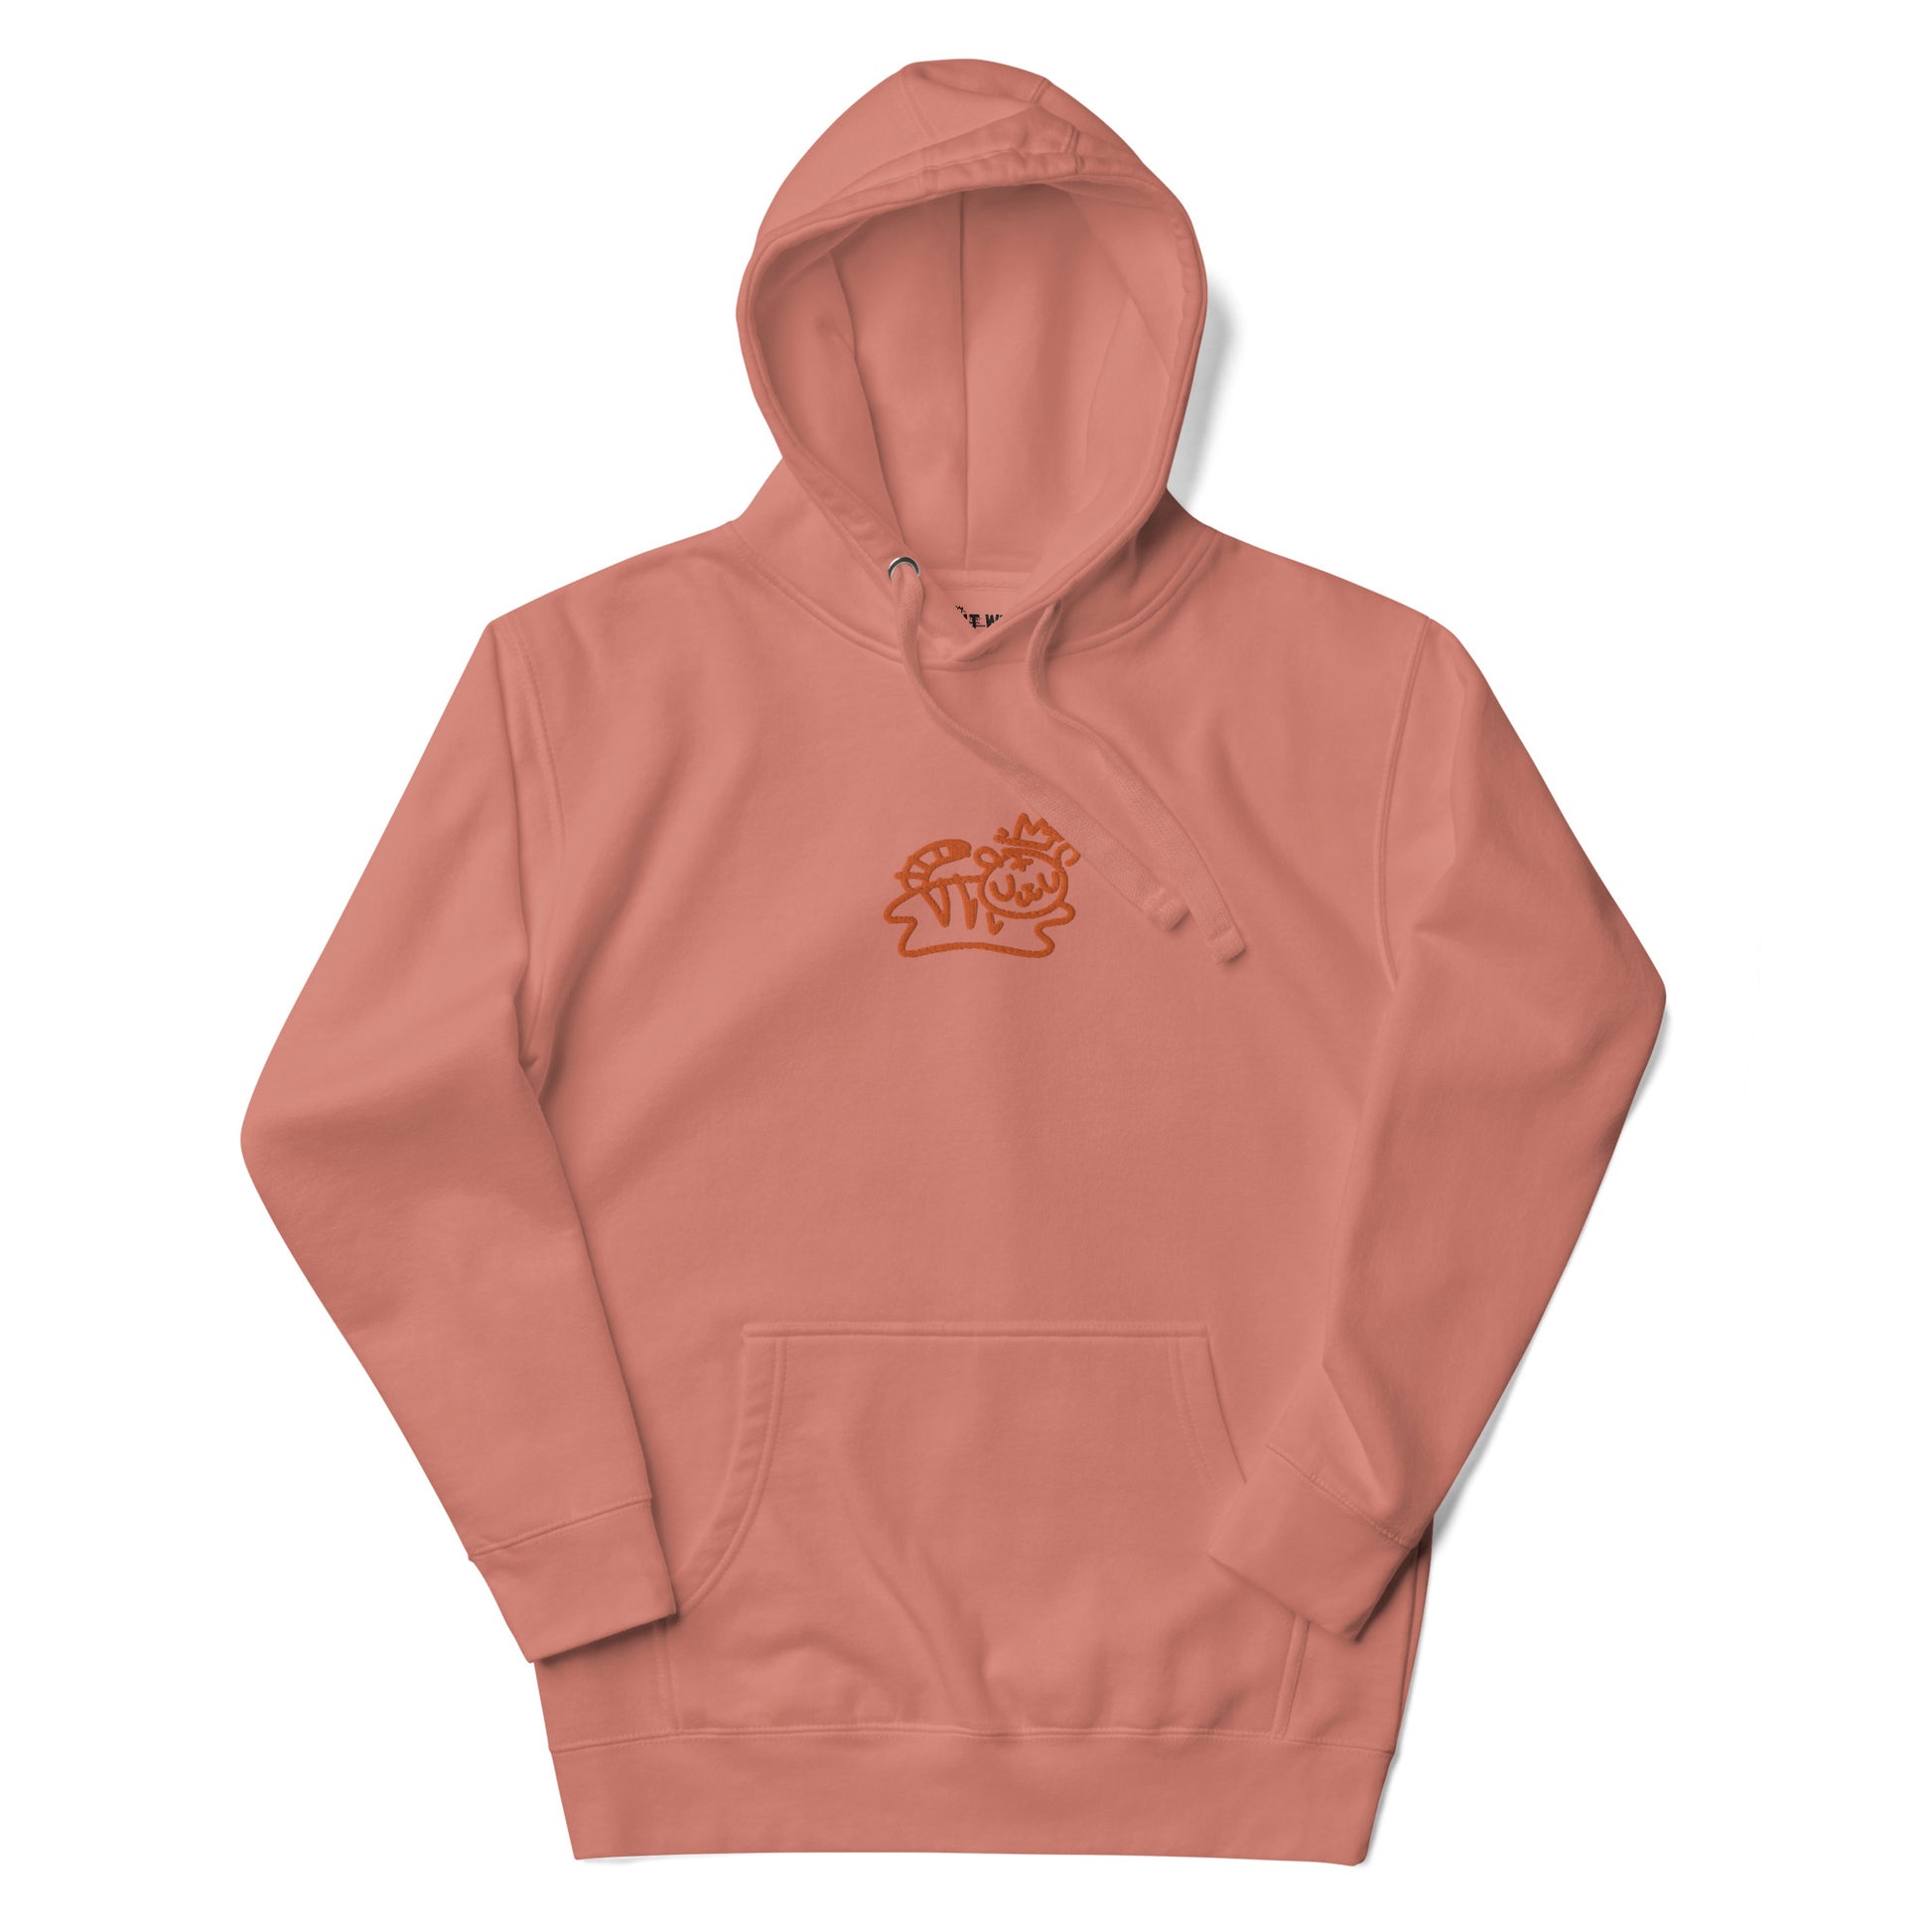 dusty rose pullover hoodie with embroidered bolt-wear tiger logo on chest 